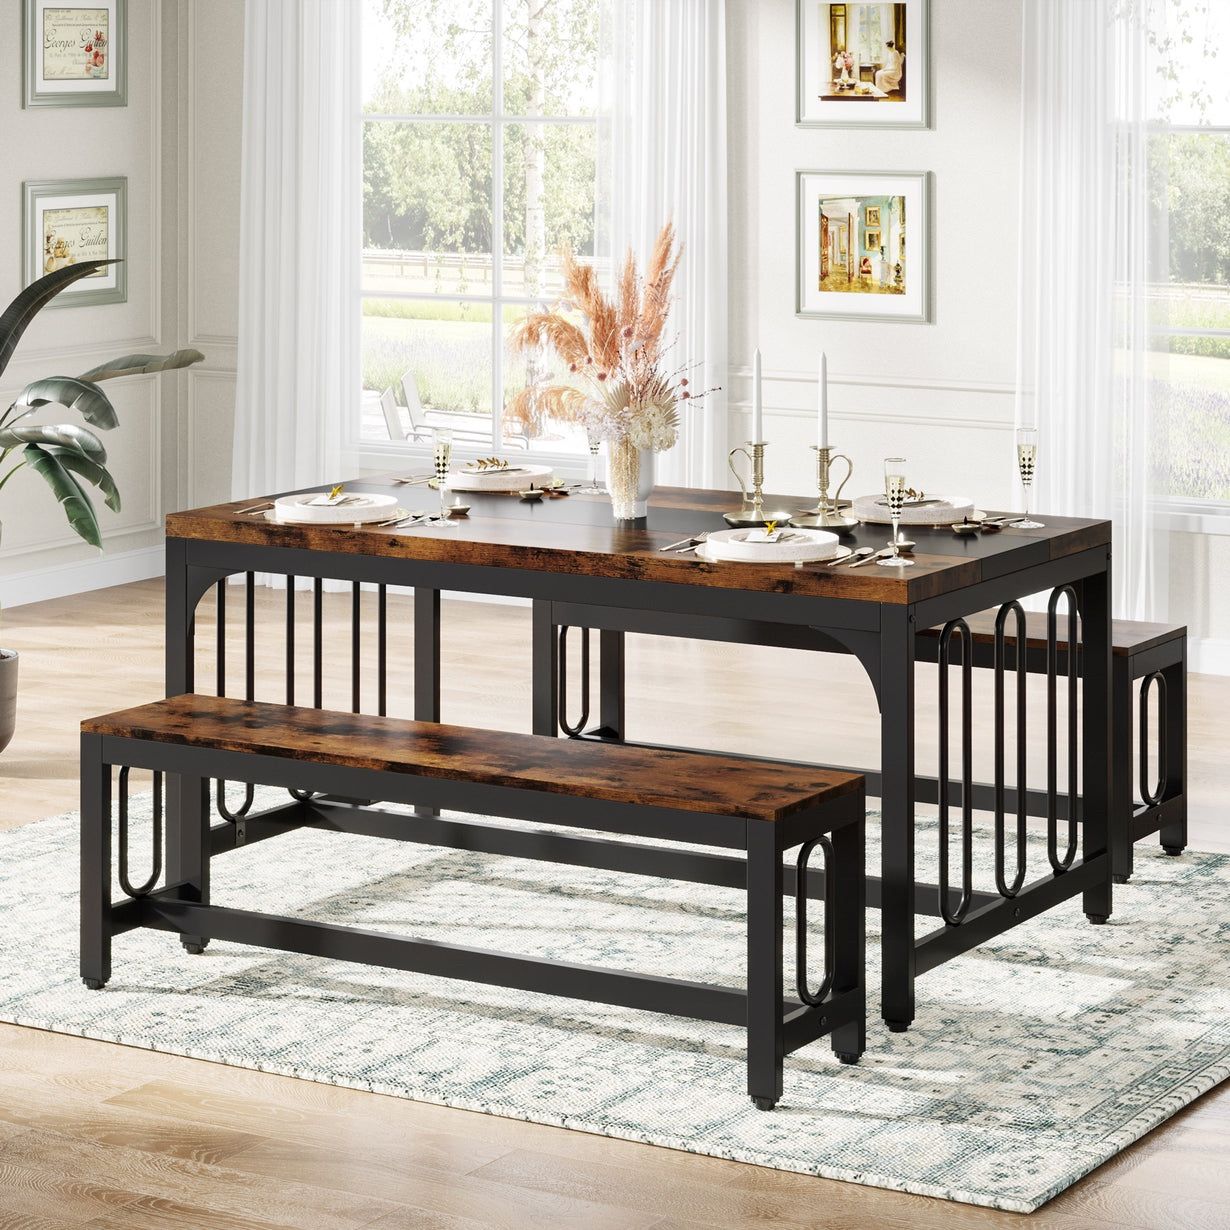 Dining Table Set, 3-Piece Kitchen Table with 2 Benches for 4-6 People